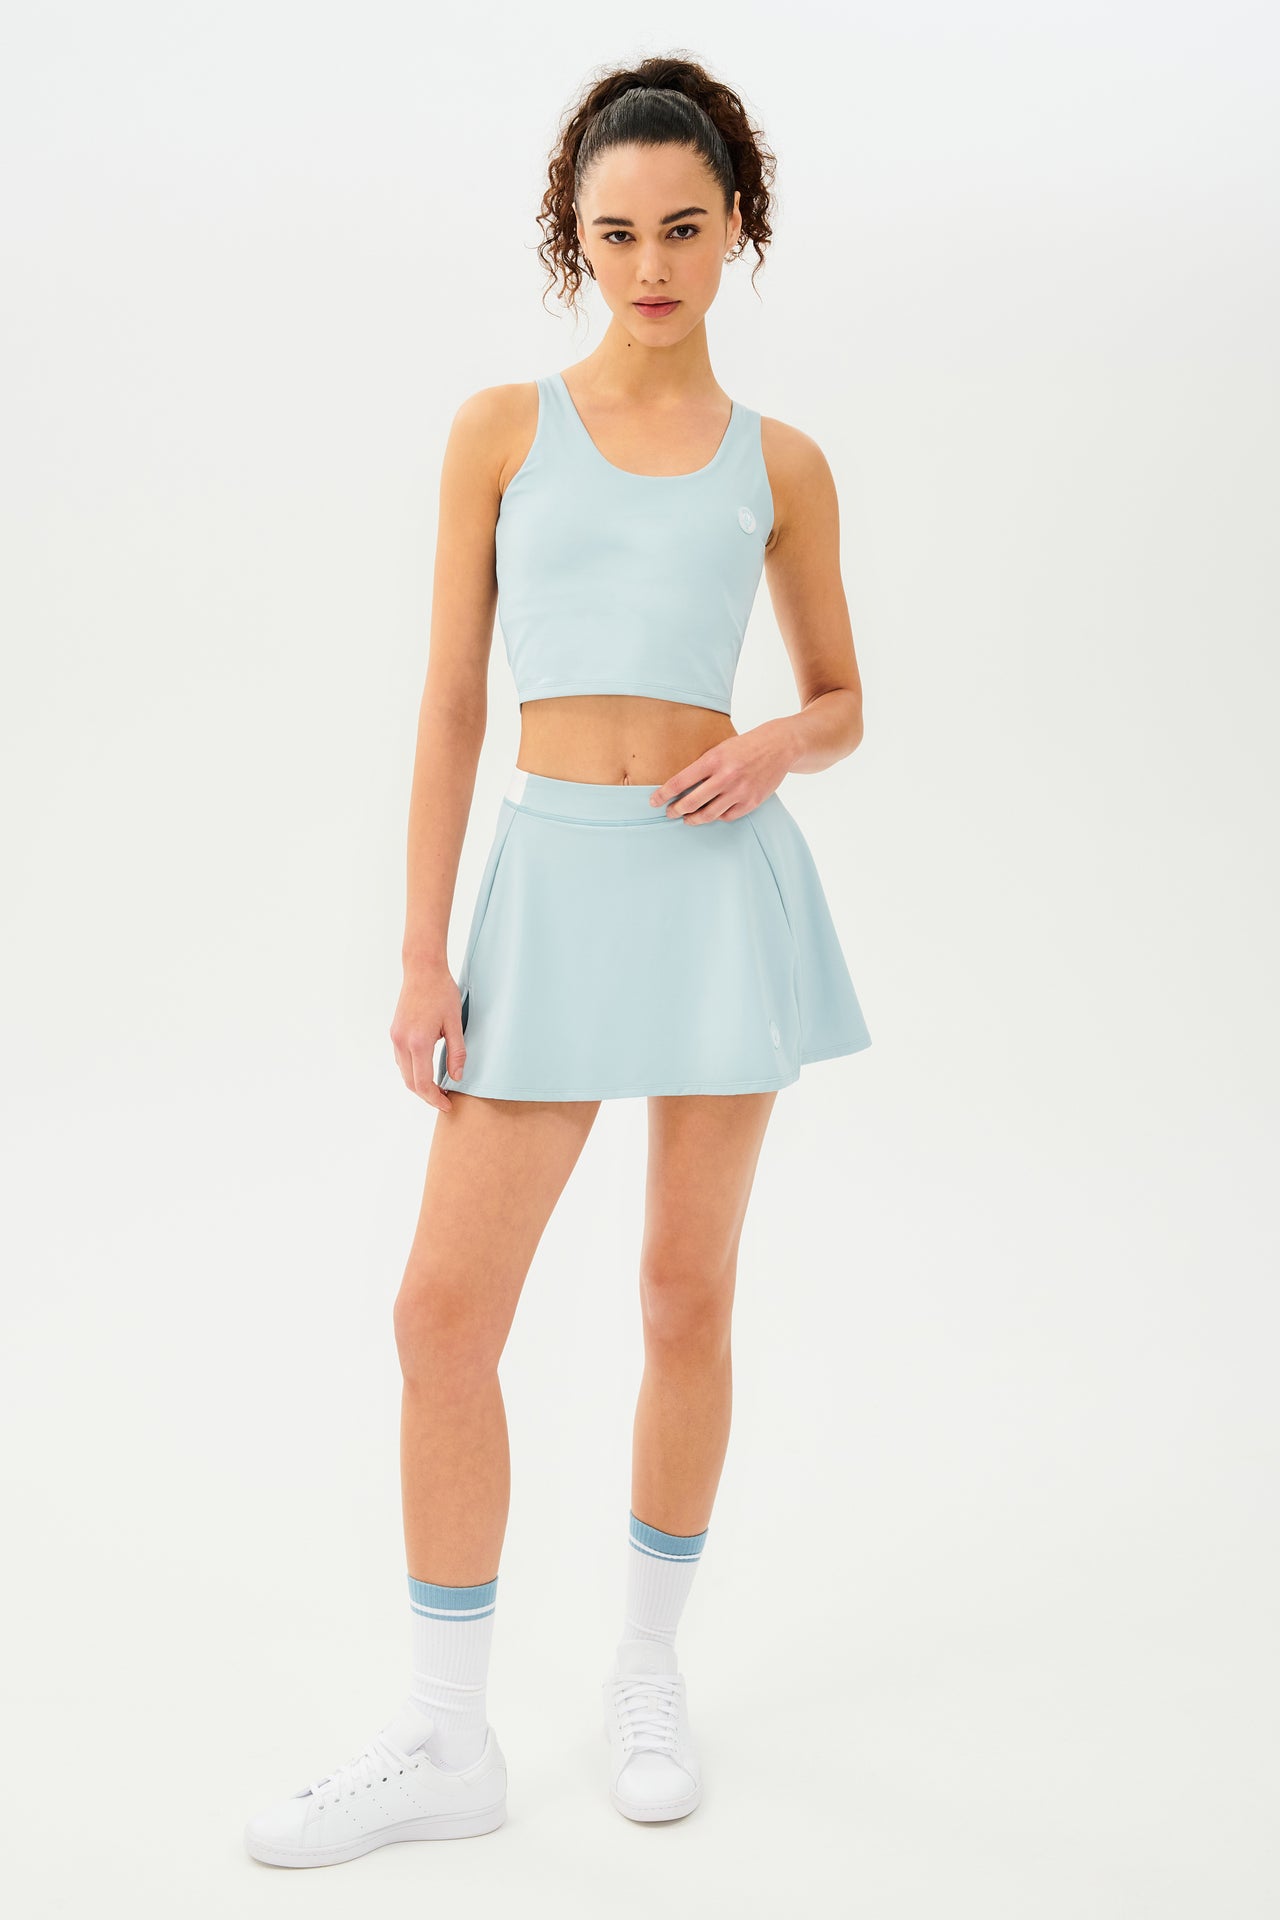 Front full view of woman with dark curly hair in a ponytail wearing a cropped teal tank bra with teal skort with white details on the waistband and logo. Model is wearing white socks with teal stripe and all white shoes